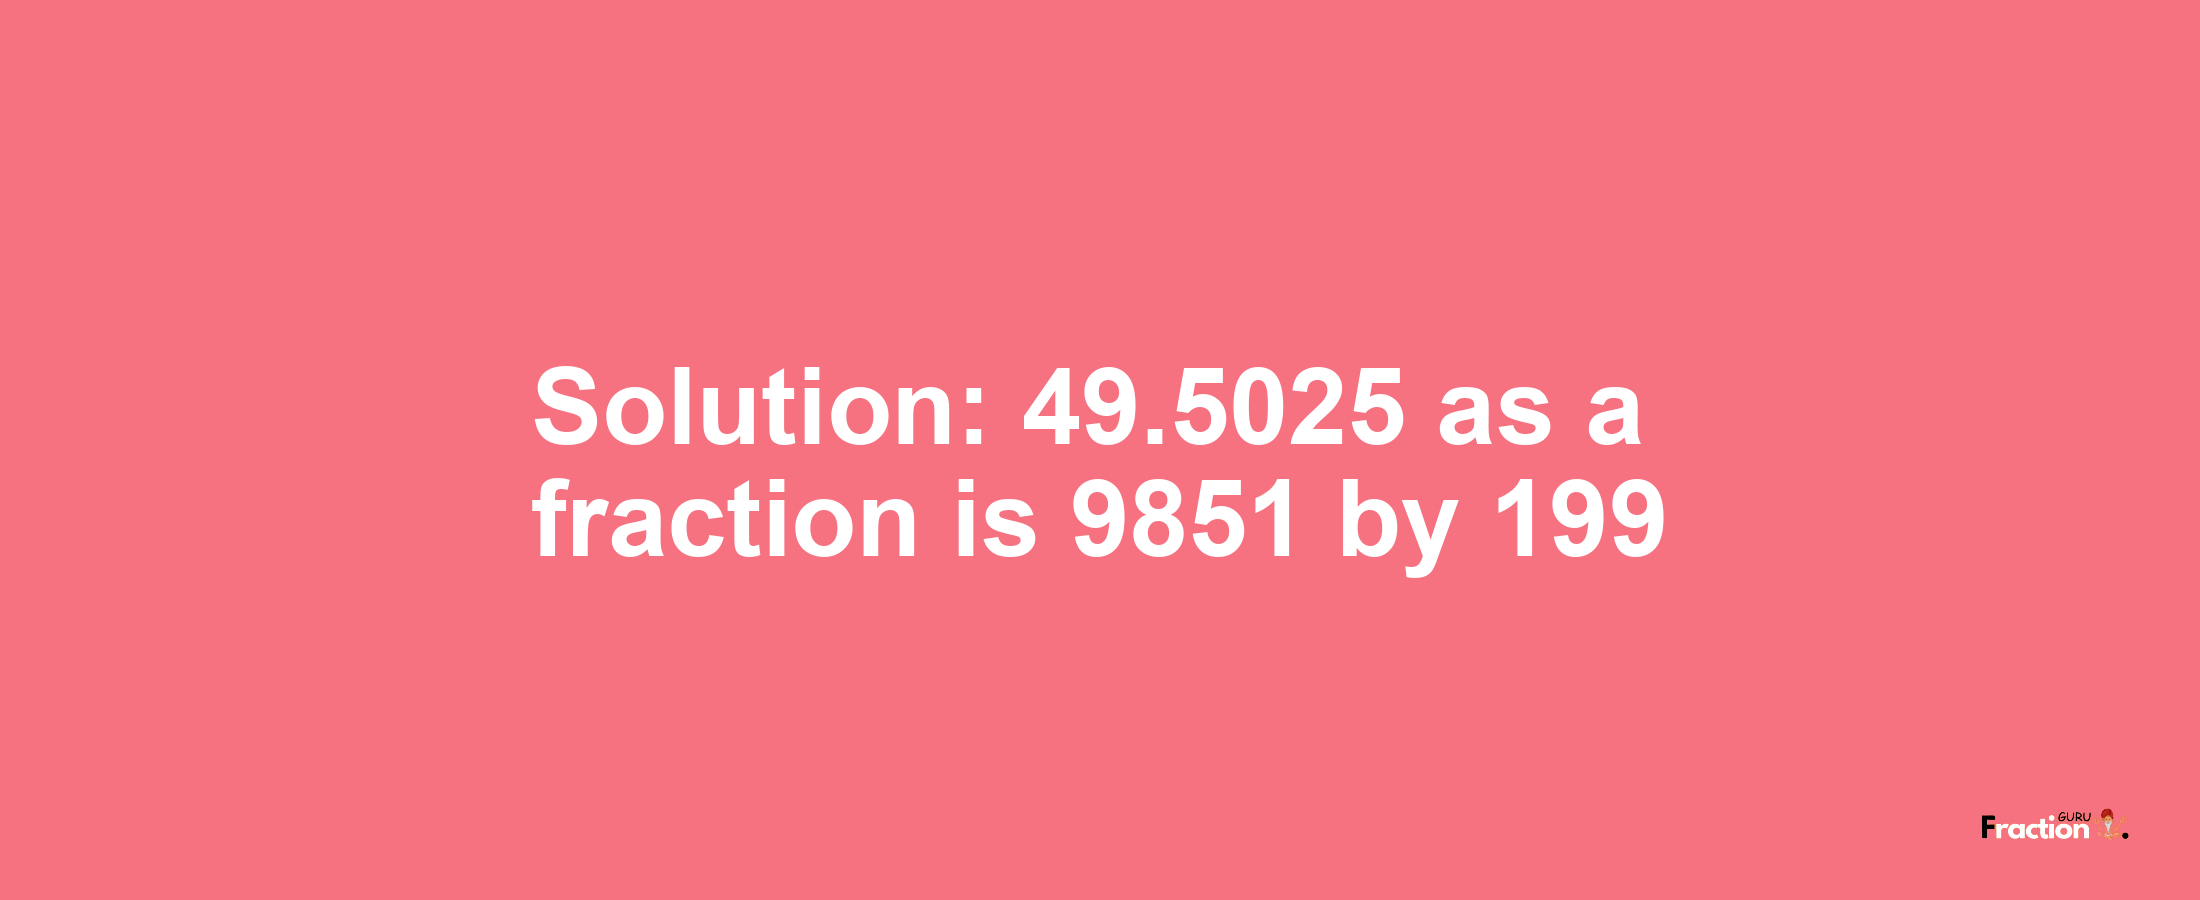 Solution:49.5025 as a fraction is 9851/199